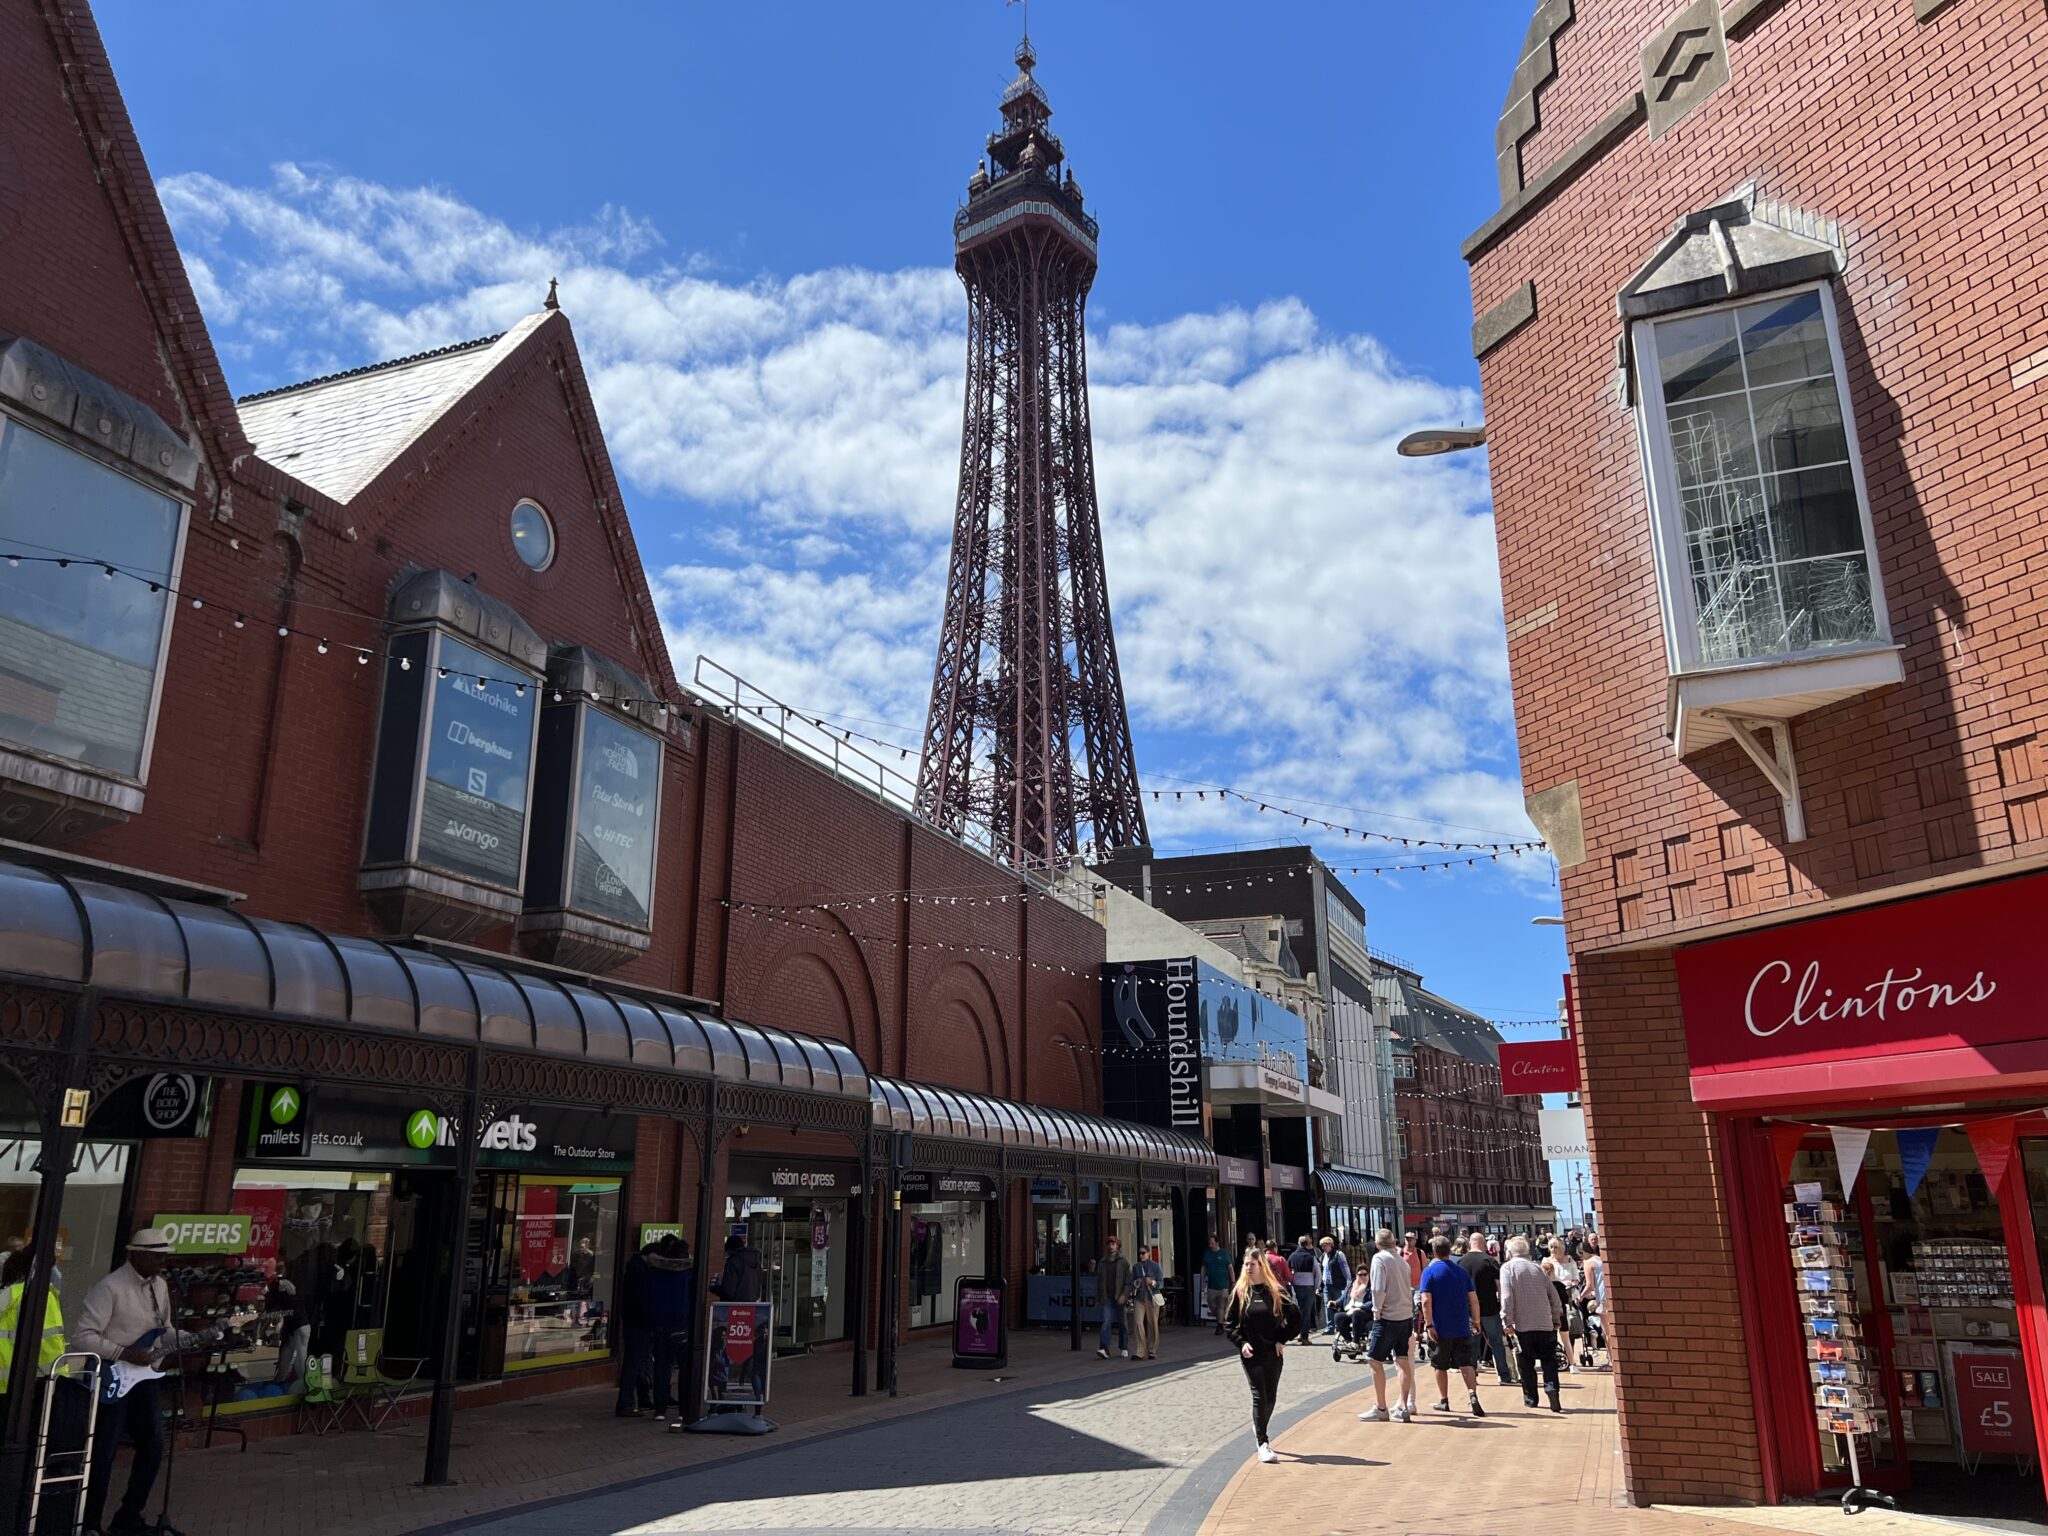 Victoria Street in Blackpool Town Centre